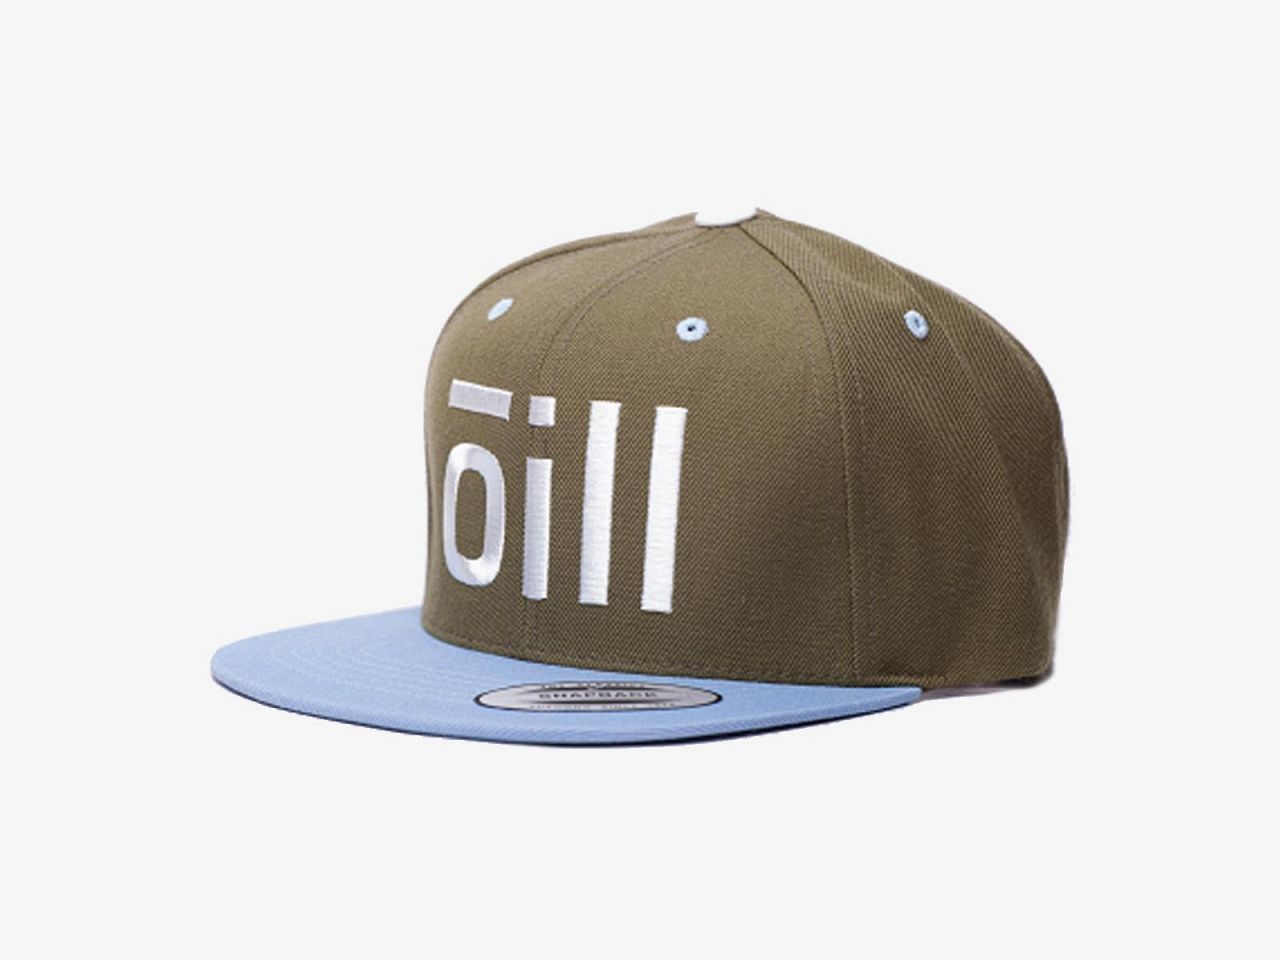 Inhibere rulletrappe Stoop Army Cap | Oill